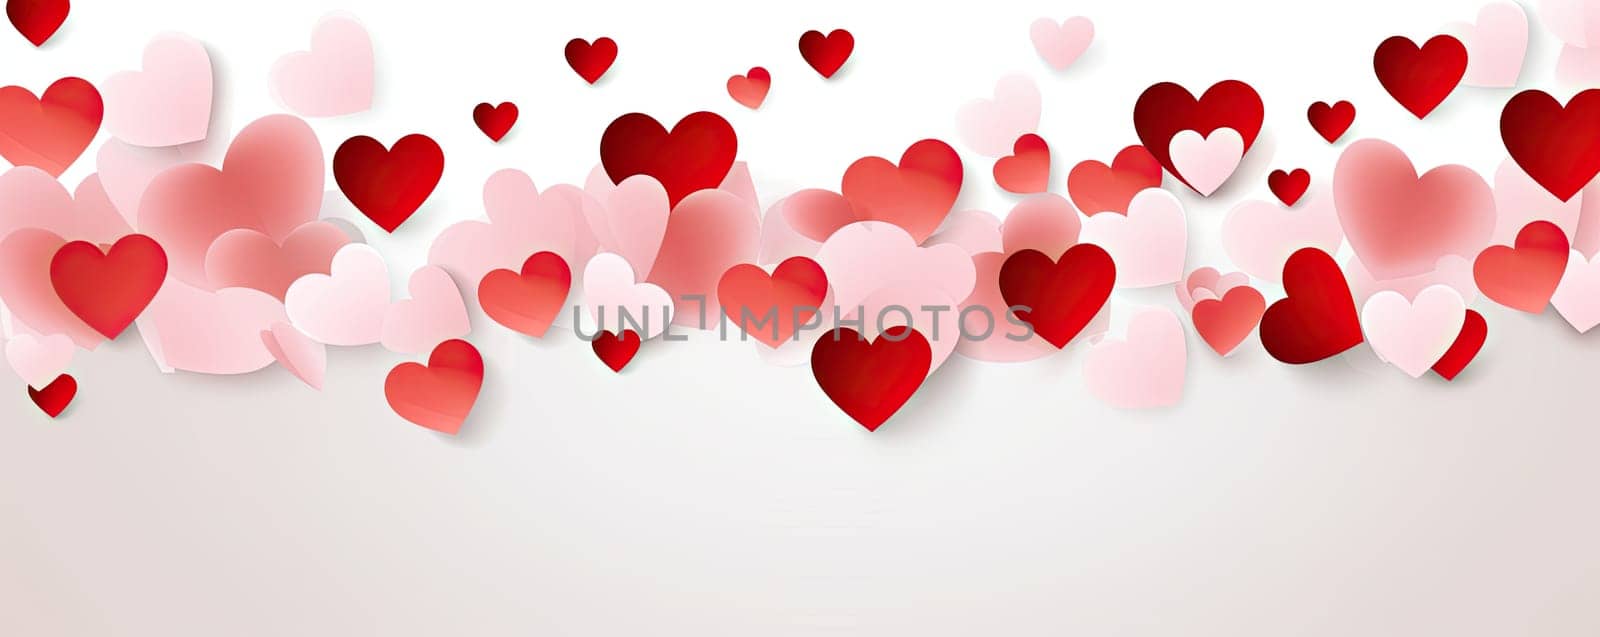 Banner with red and pink hearts on white background by Yurich32